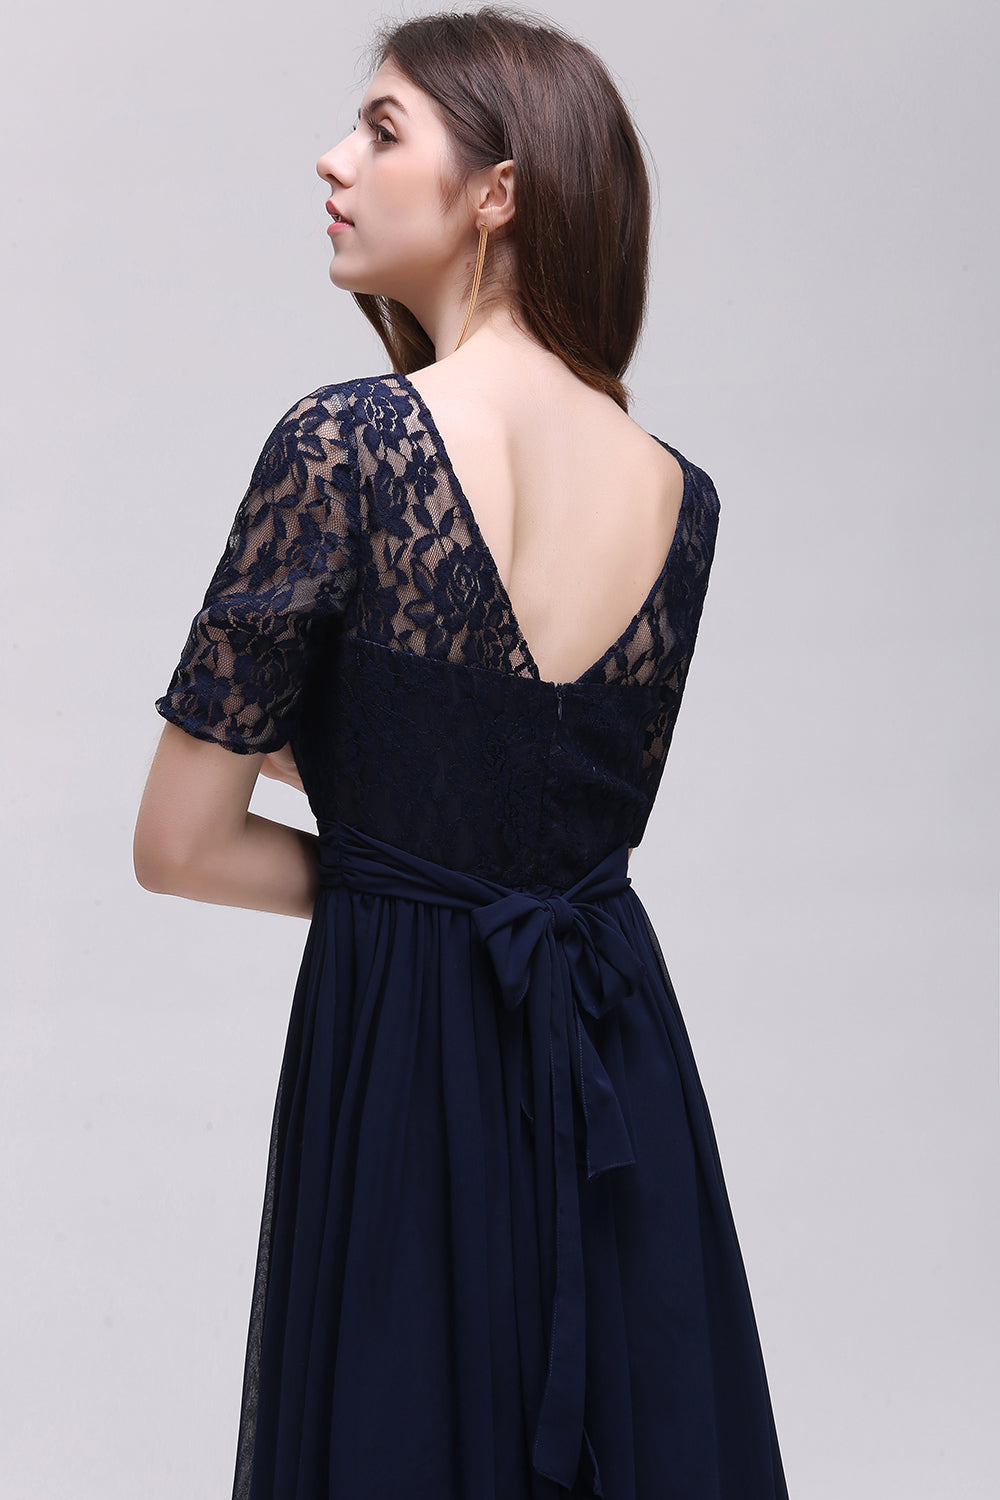 Affordable Lace Scoop Dark Navy Bridesmaid Dresses with Half-Sleeves